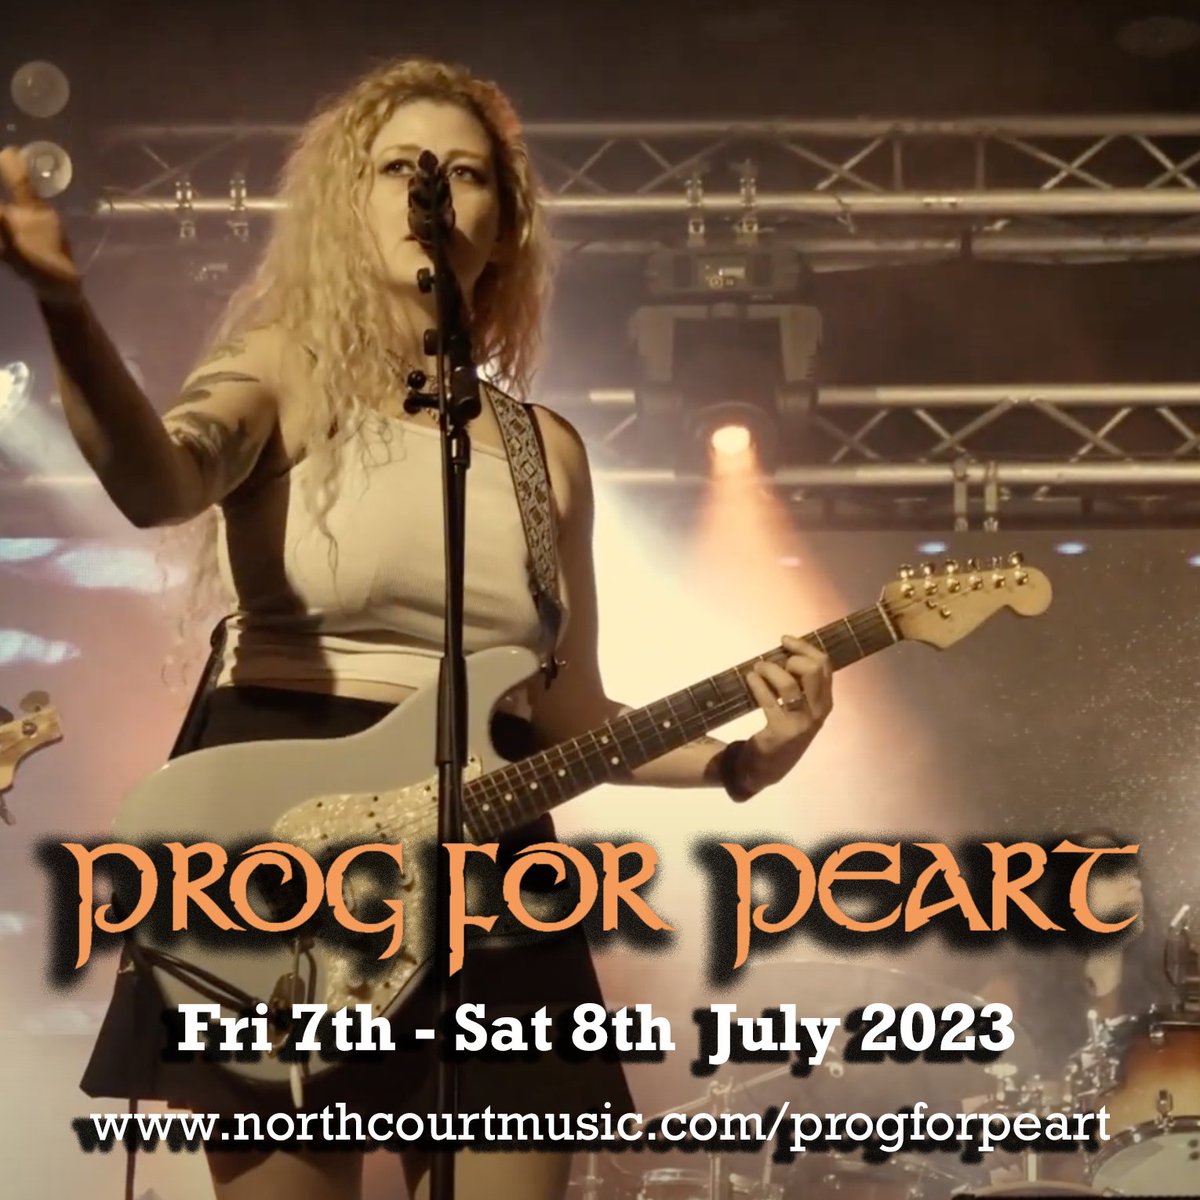 We're Super Chuffed to play Prog For Peart in July! 🥳 Can't wait to share a stage with some excellent fellow proggers @vinemessiah, @Viriditas, @YuvalRonMusic, ZIO, @DorisBrendel and more! Tickets: northcourtmusic.com/progforpeart.h… #music #livemusic #progrock #artrock #superchuffed 🎉